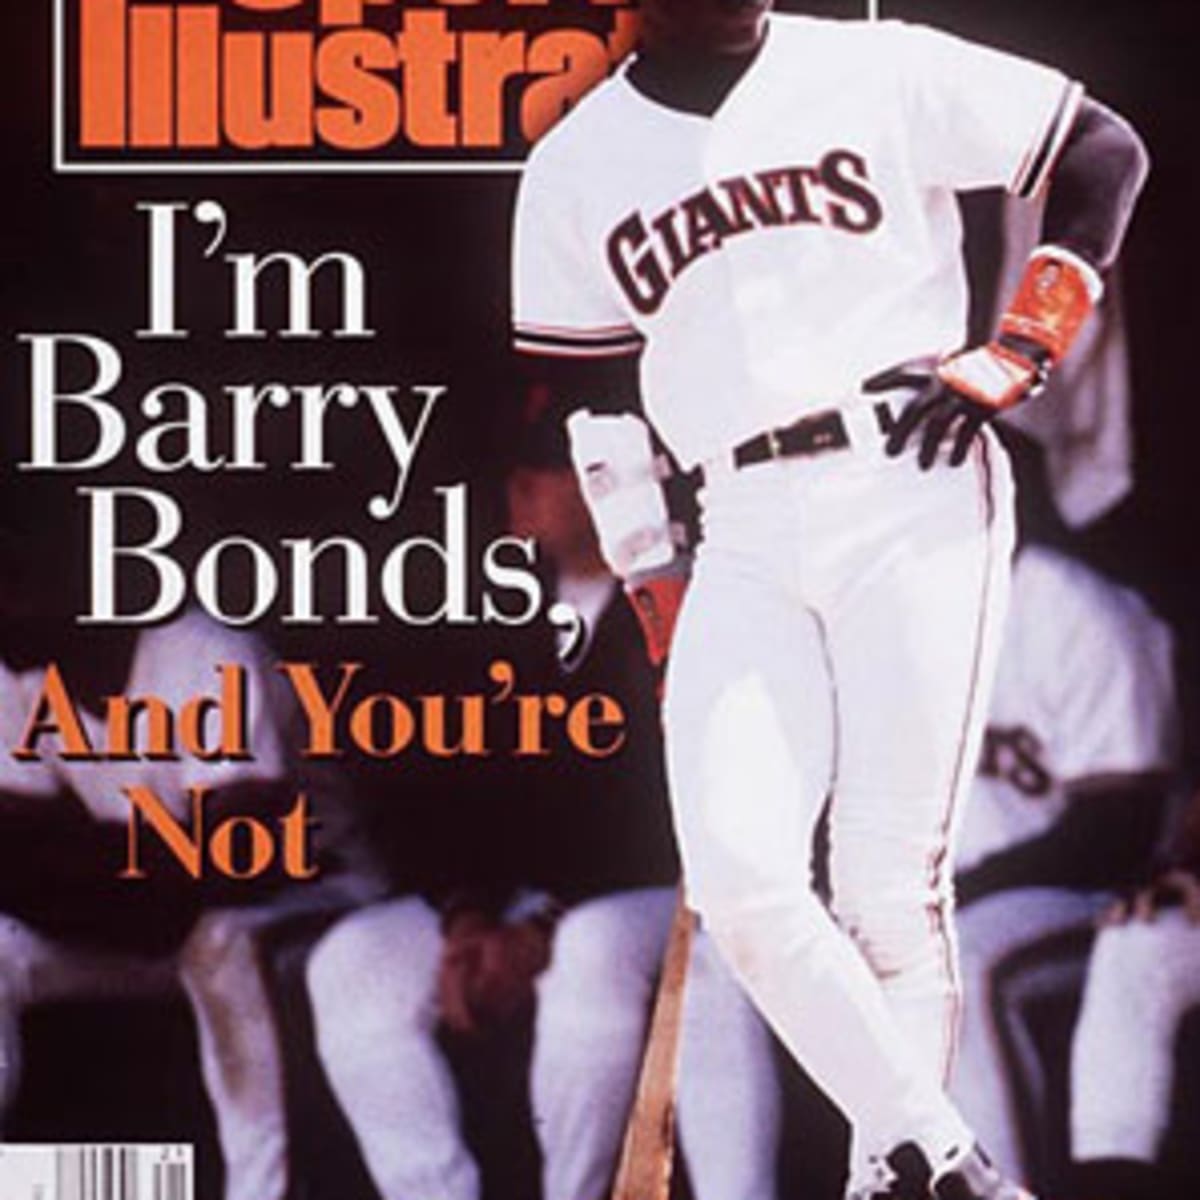 MLB Home Run king, former Pirates All-Star Barry Bonds shut out of